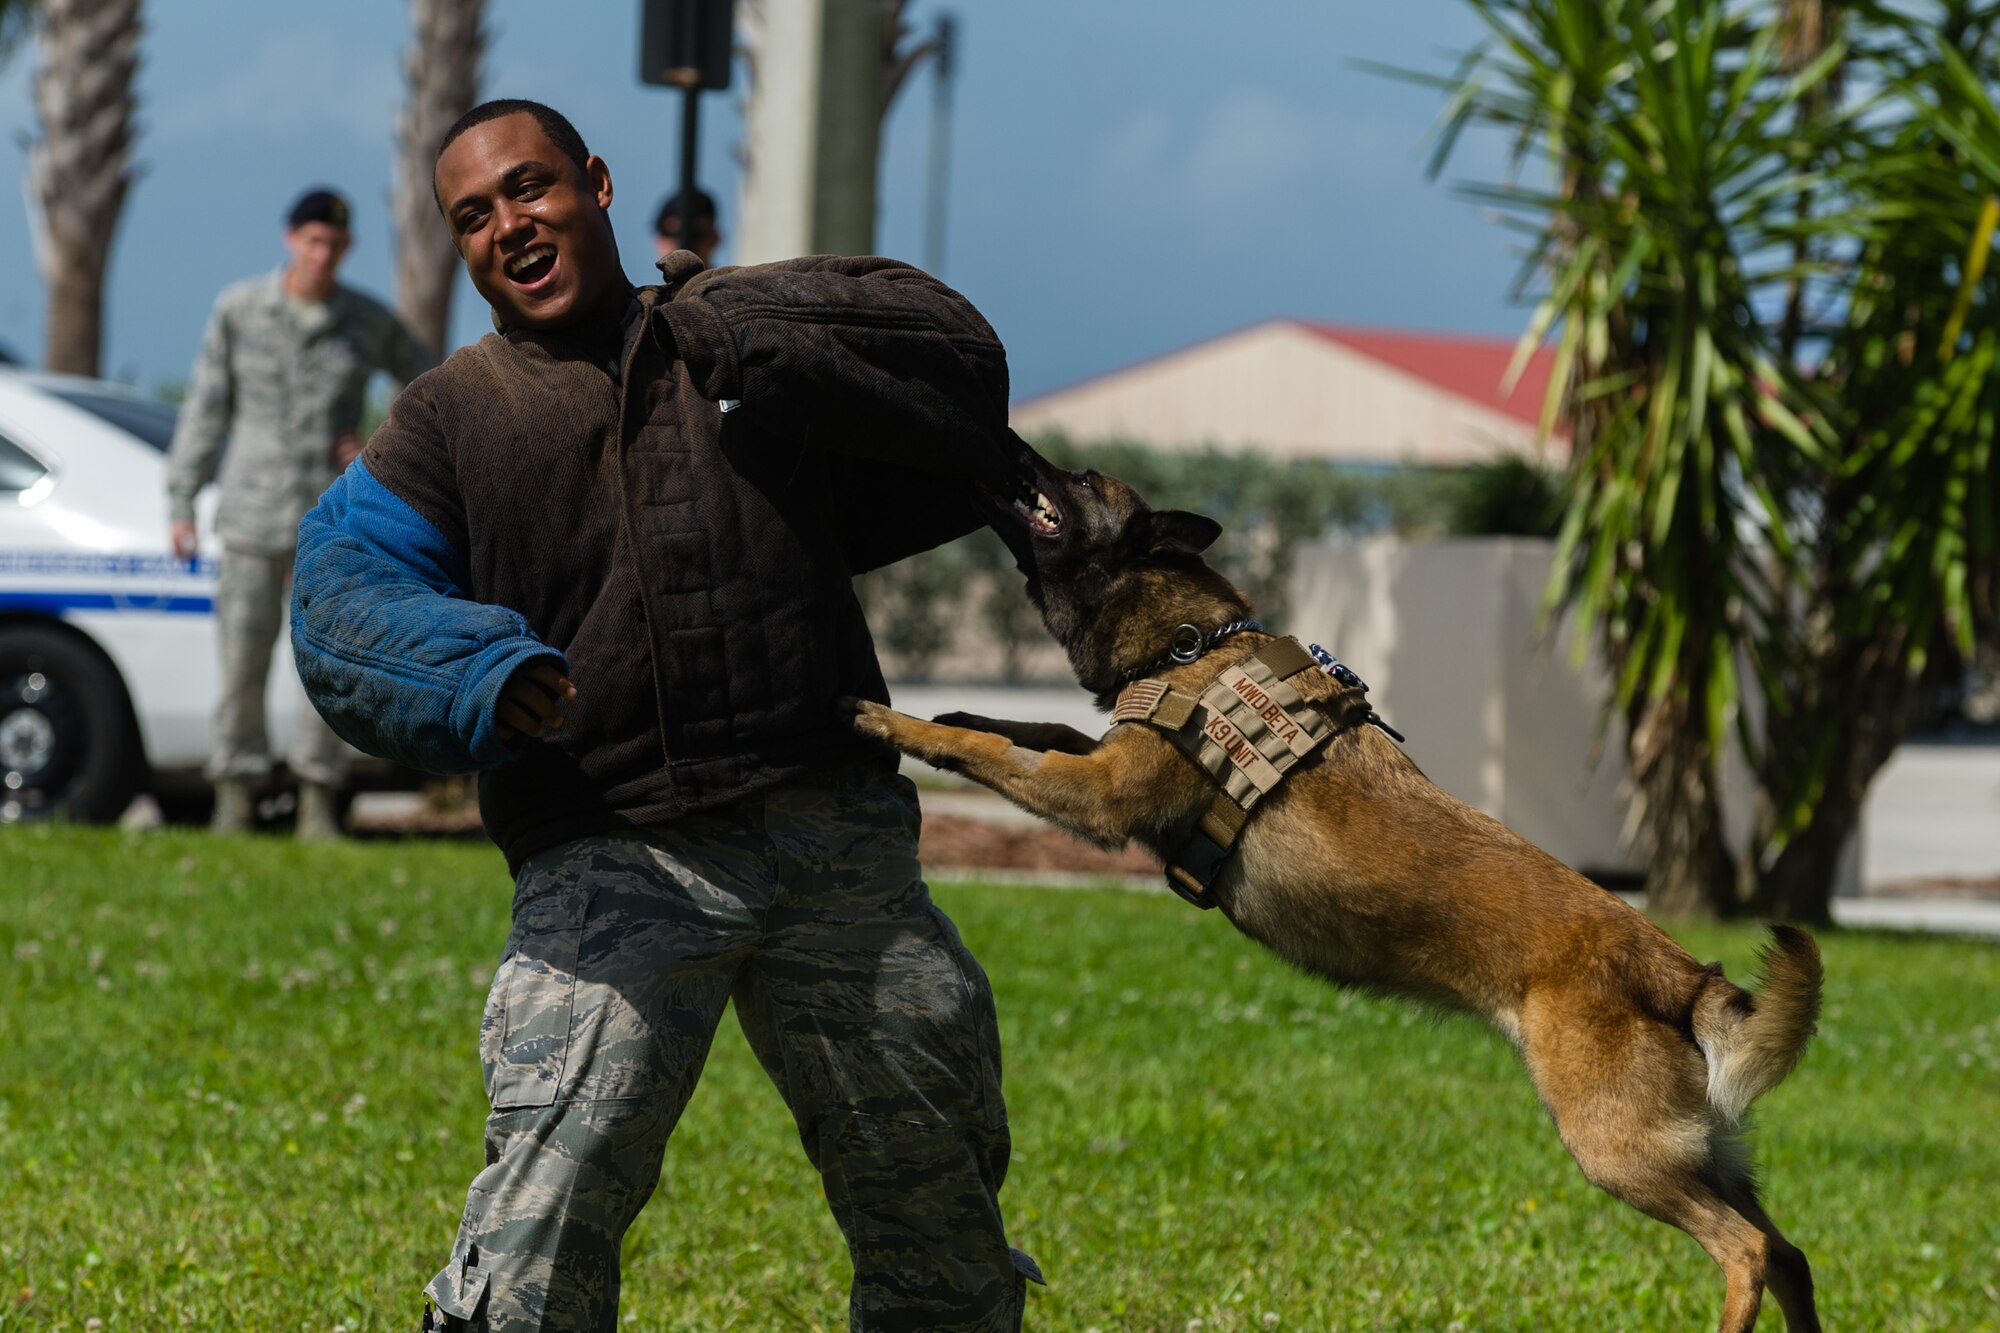 Senior Airman Malcolm Young, 45th Security Forces Squadron Military Working Dog handler, and Beta, MWD, demonstrate a patrol attack during an Open House in conjunction with Police Week at Patrick Air Force Base, Fla. May 14, 2014. More than 70 were in attendance and received a first-hand look at the holding cells, dispatch center, weapons training simulator, mobile command post, weapons display, and patrol vehicles. (U.S. Air Force photo/Cory Long)